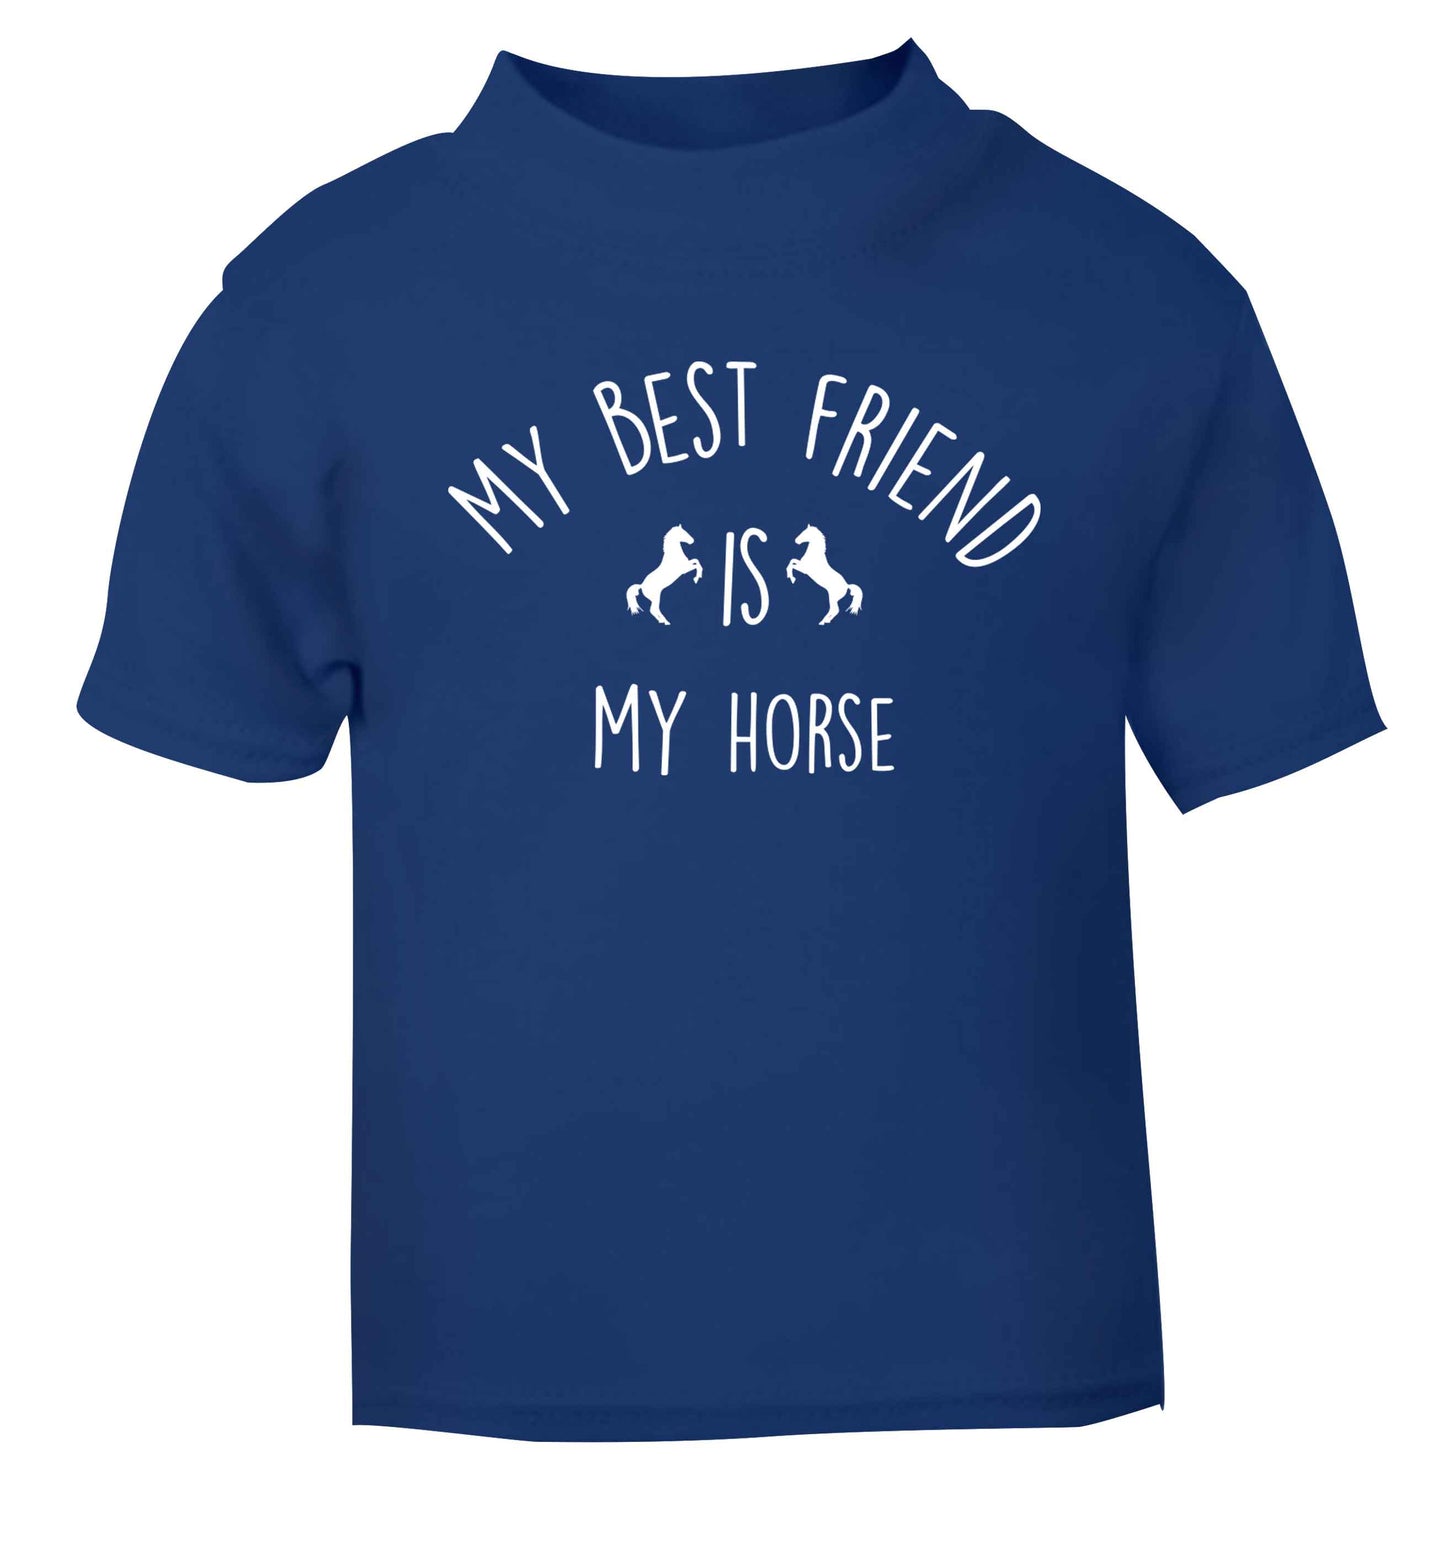 My best friend is my horse blue baby toddler Tshirt 2 Years